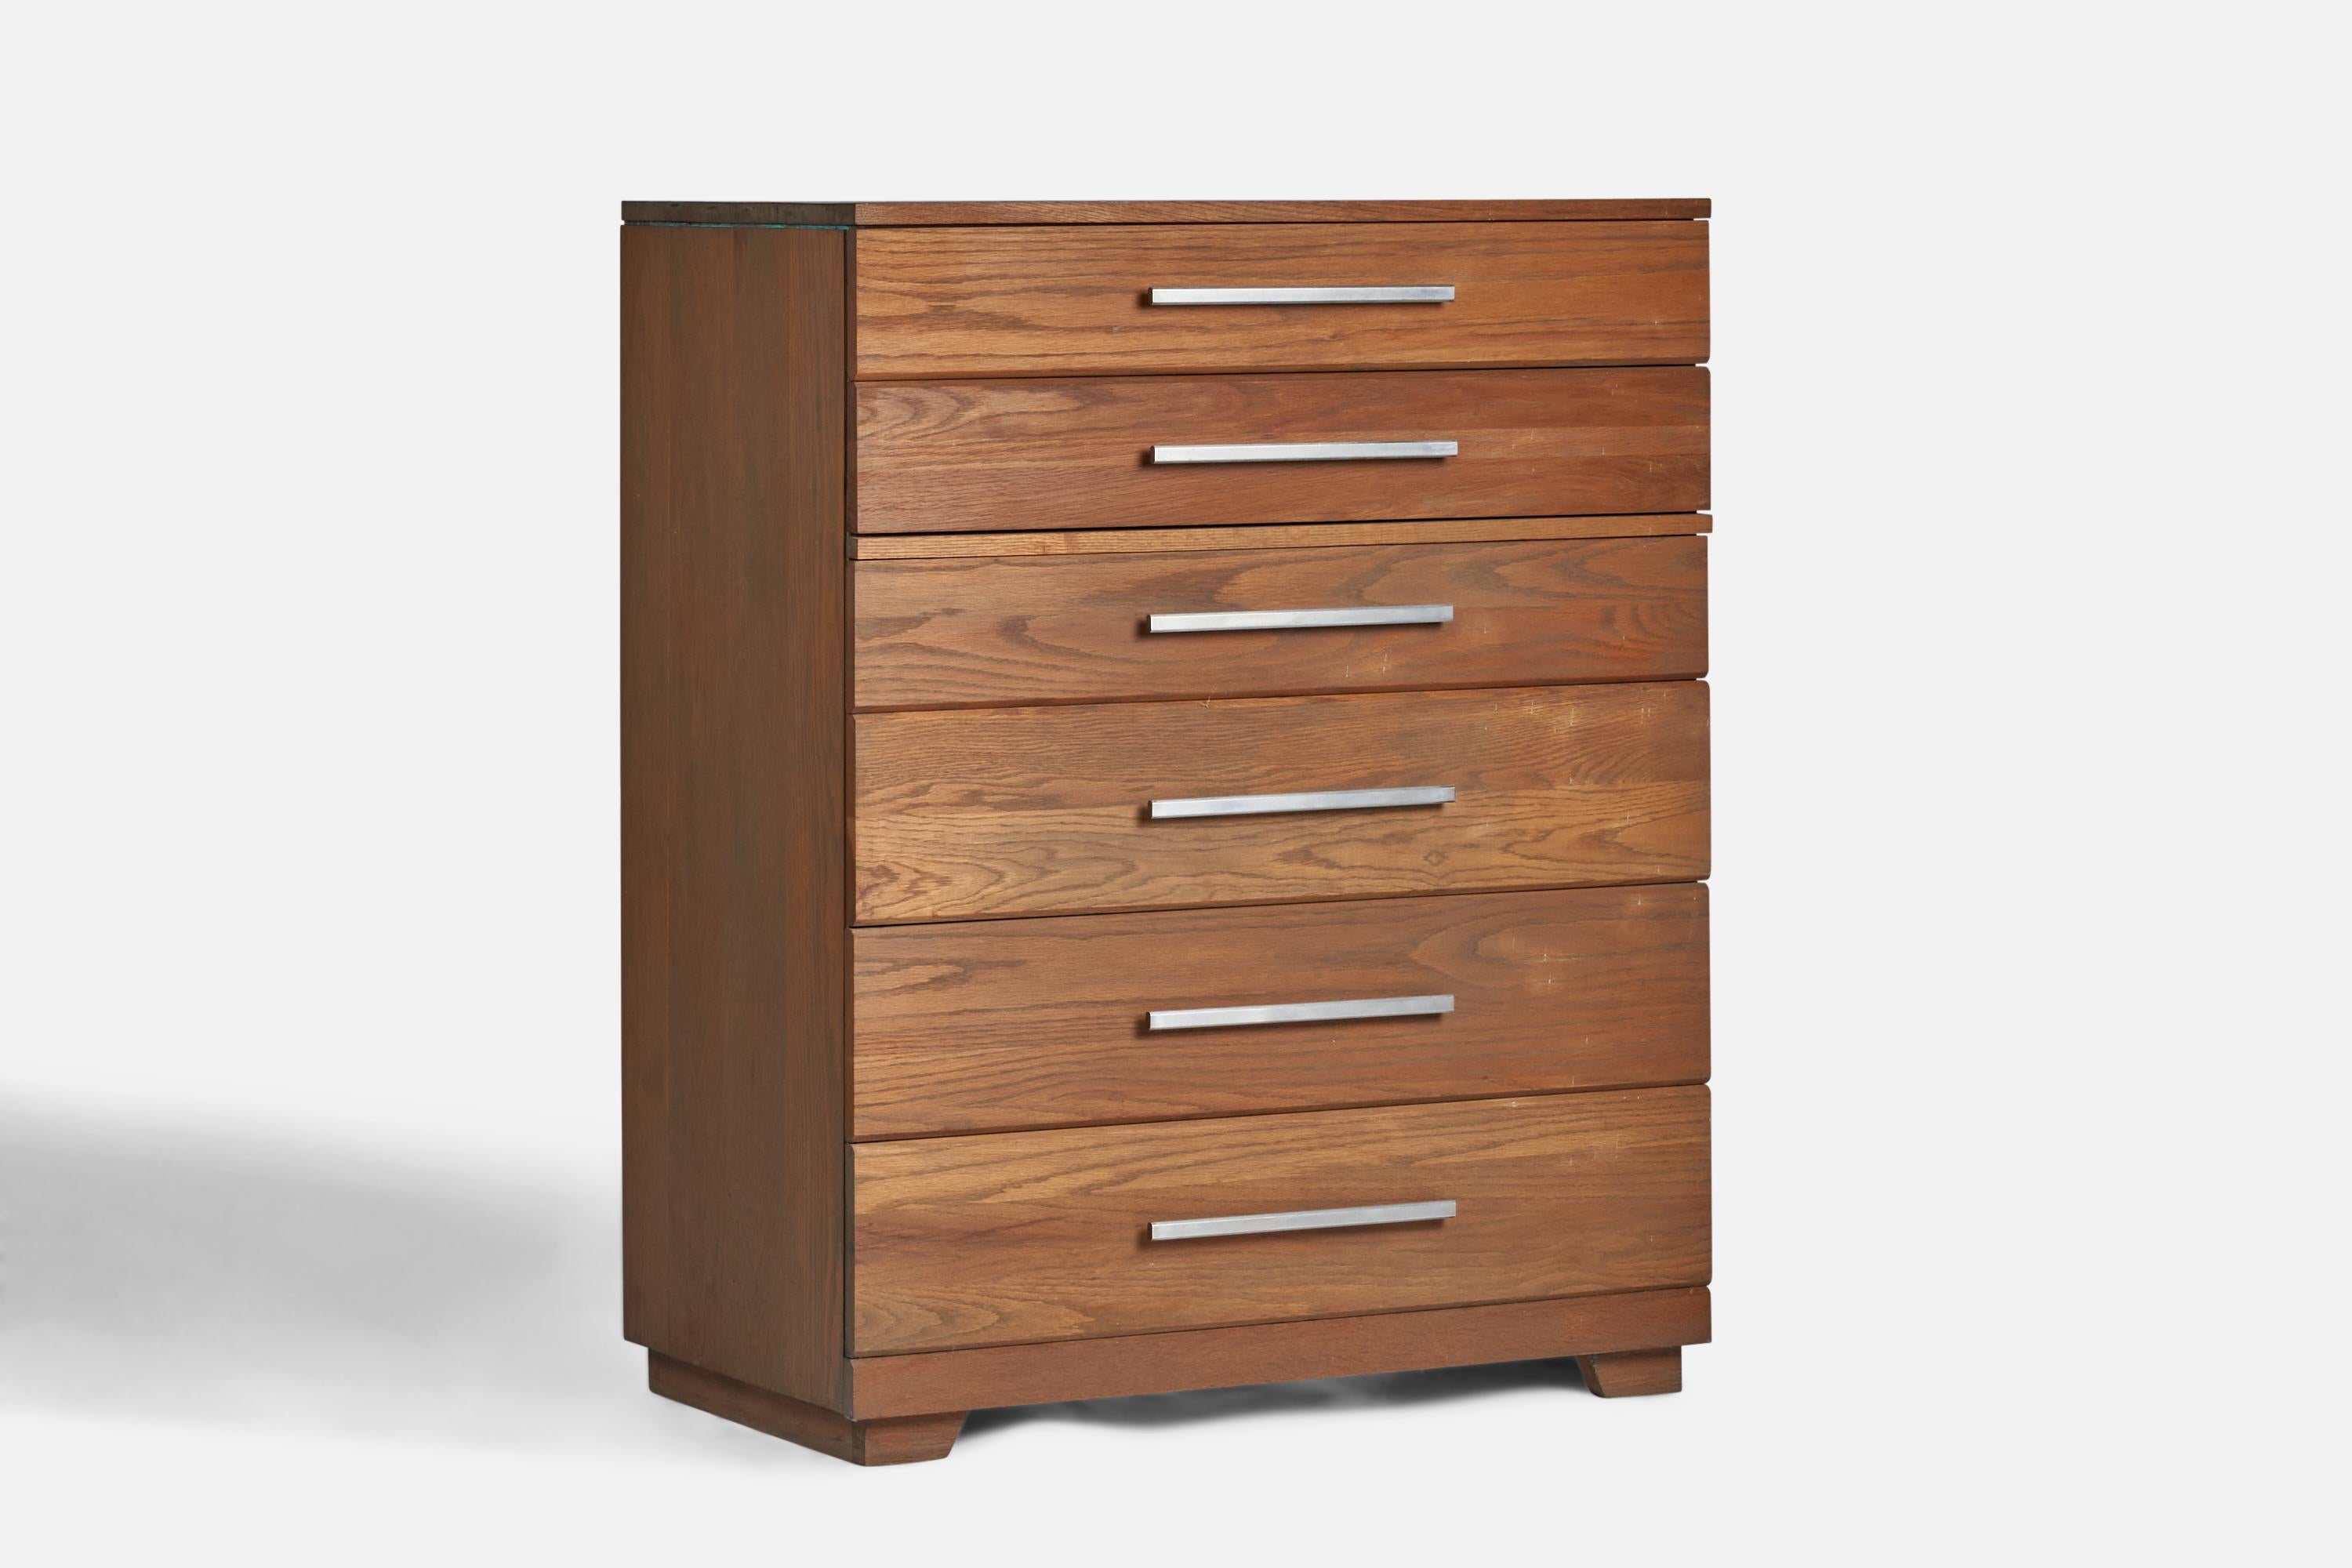 A stained oak and metal chest of drawers designed and produced in the US, 1950s.